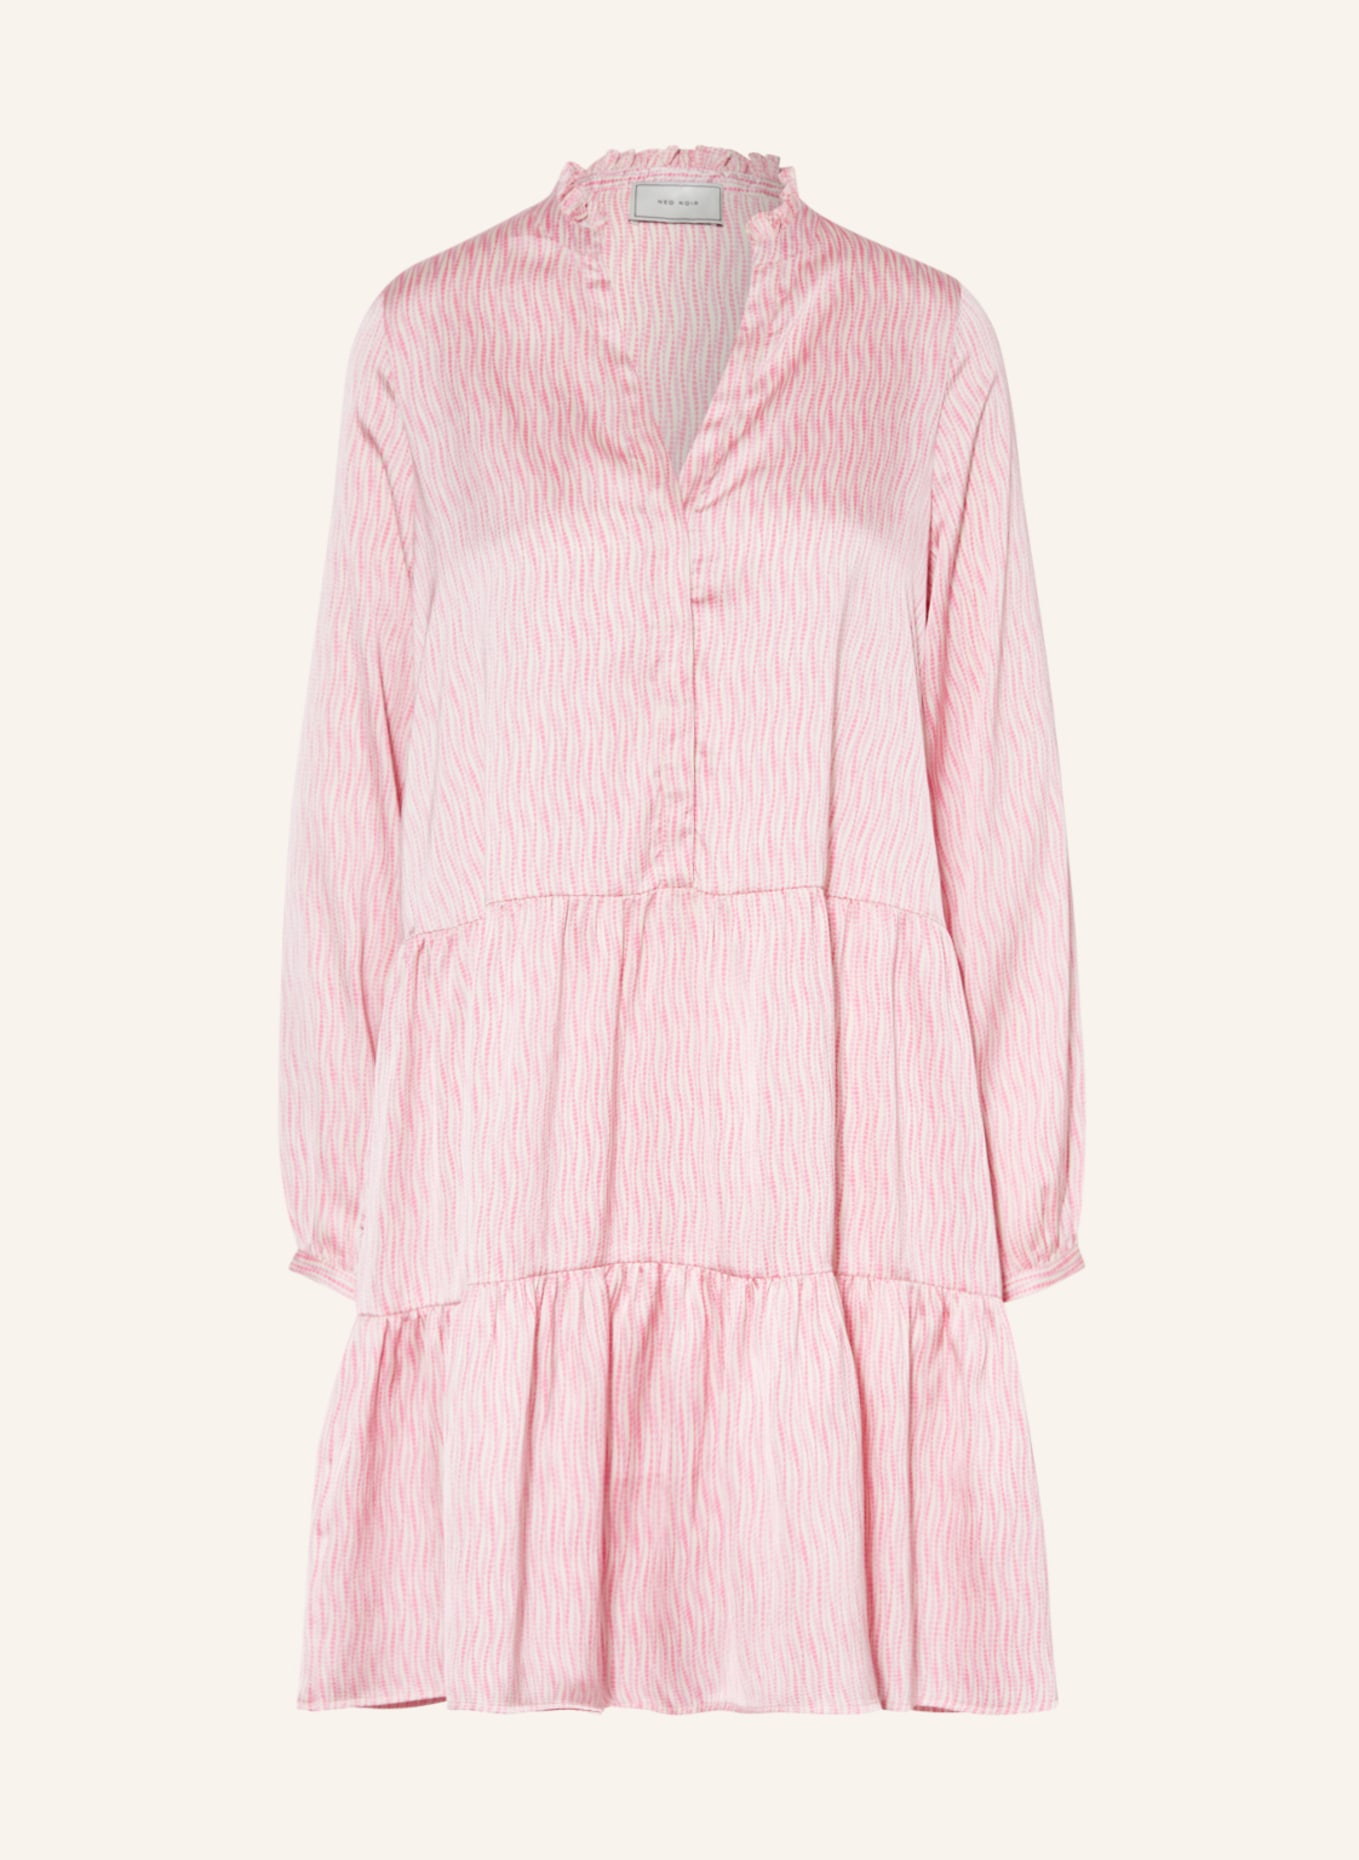 NEO NOIR Dress FEDERICA with ruffles, Color: PINK/ PINK/ WHITE (Image 1)